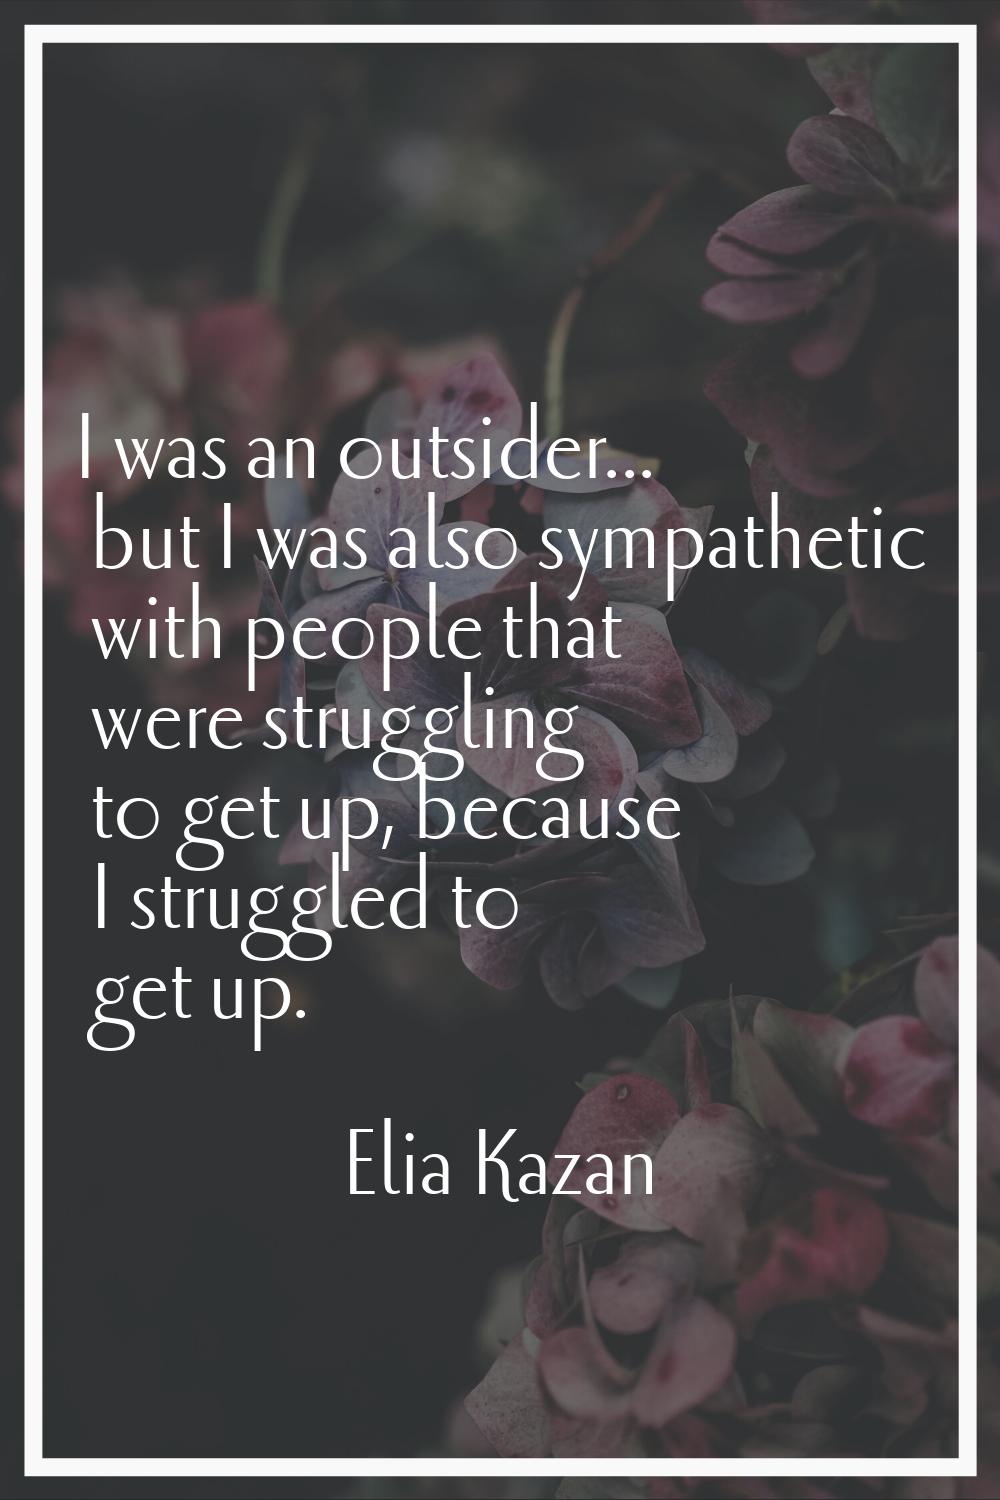 I was an outsider... but I was also sympathetic with people that were struggling to get up, because